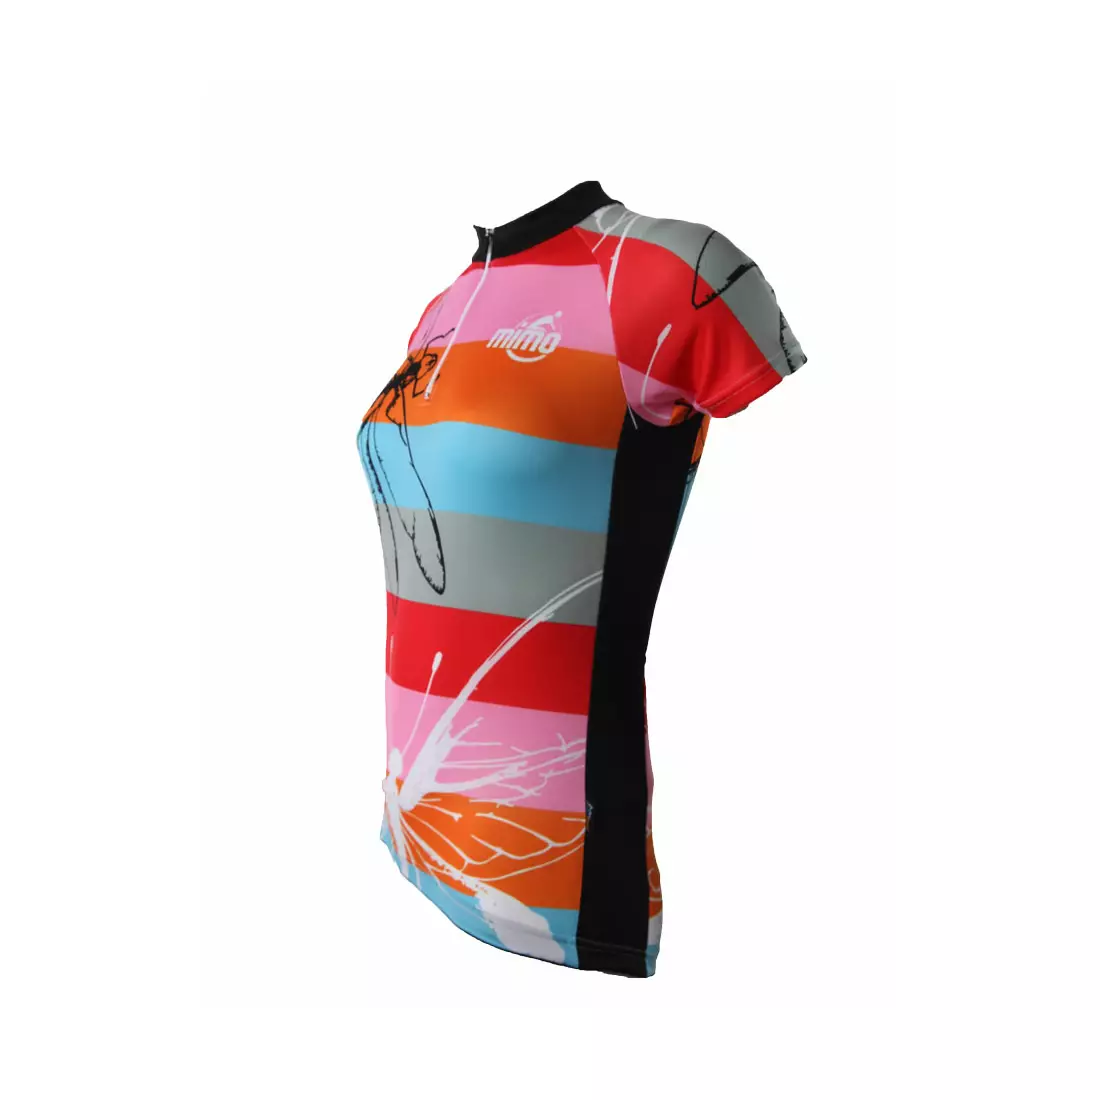 MikeSPORT DESIGN DRAGON FLY women's cycling jersey